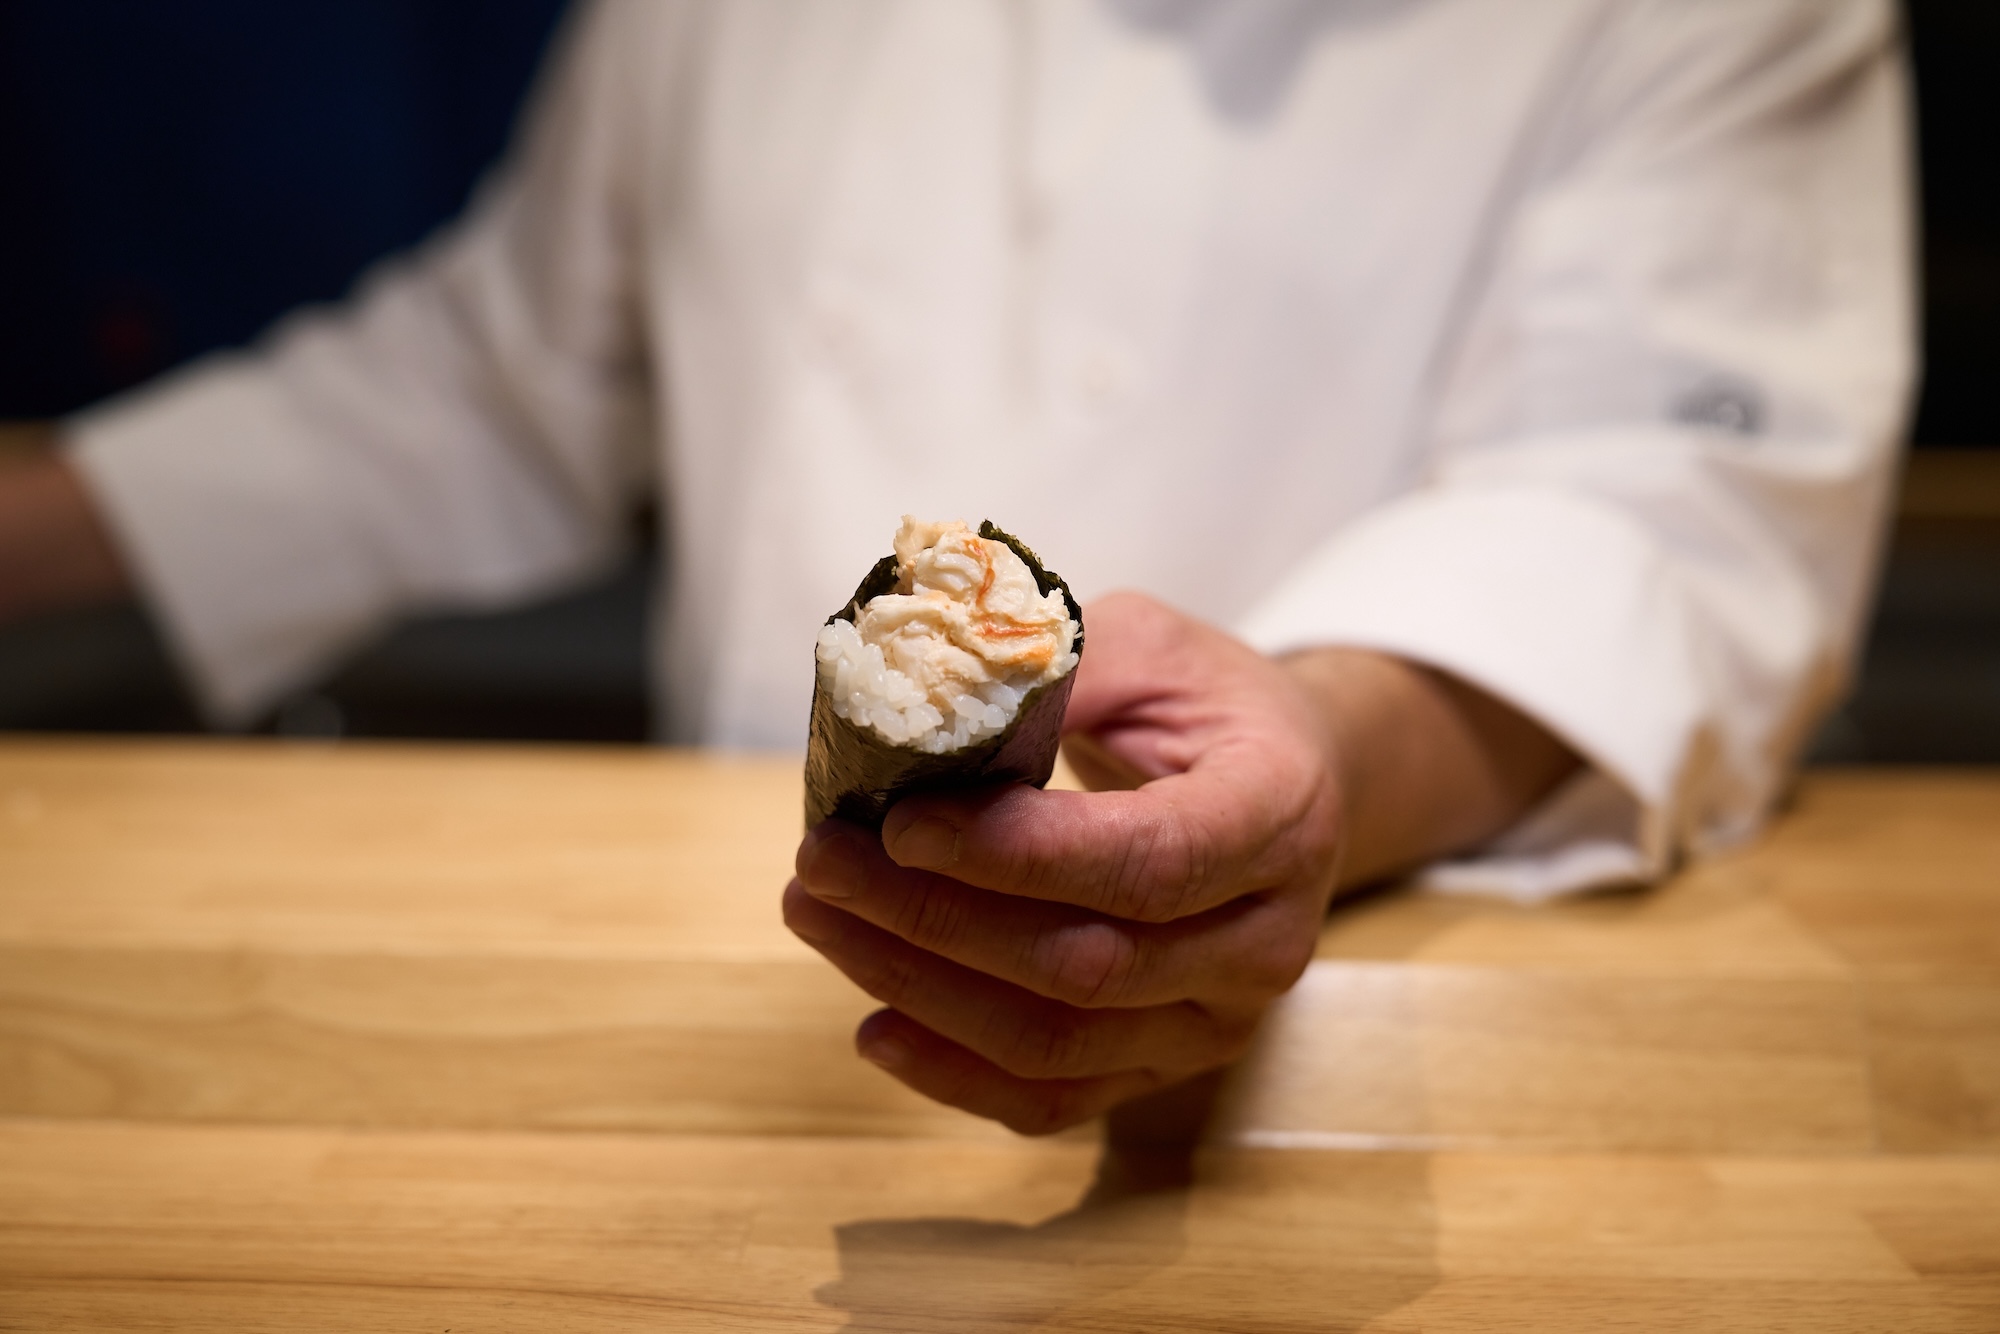 Miami is getting its first proper Japanese hand roll bar